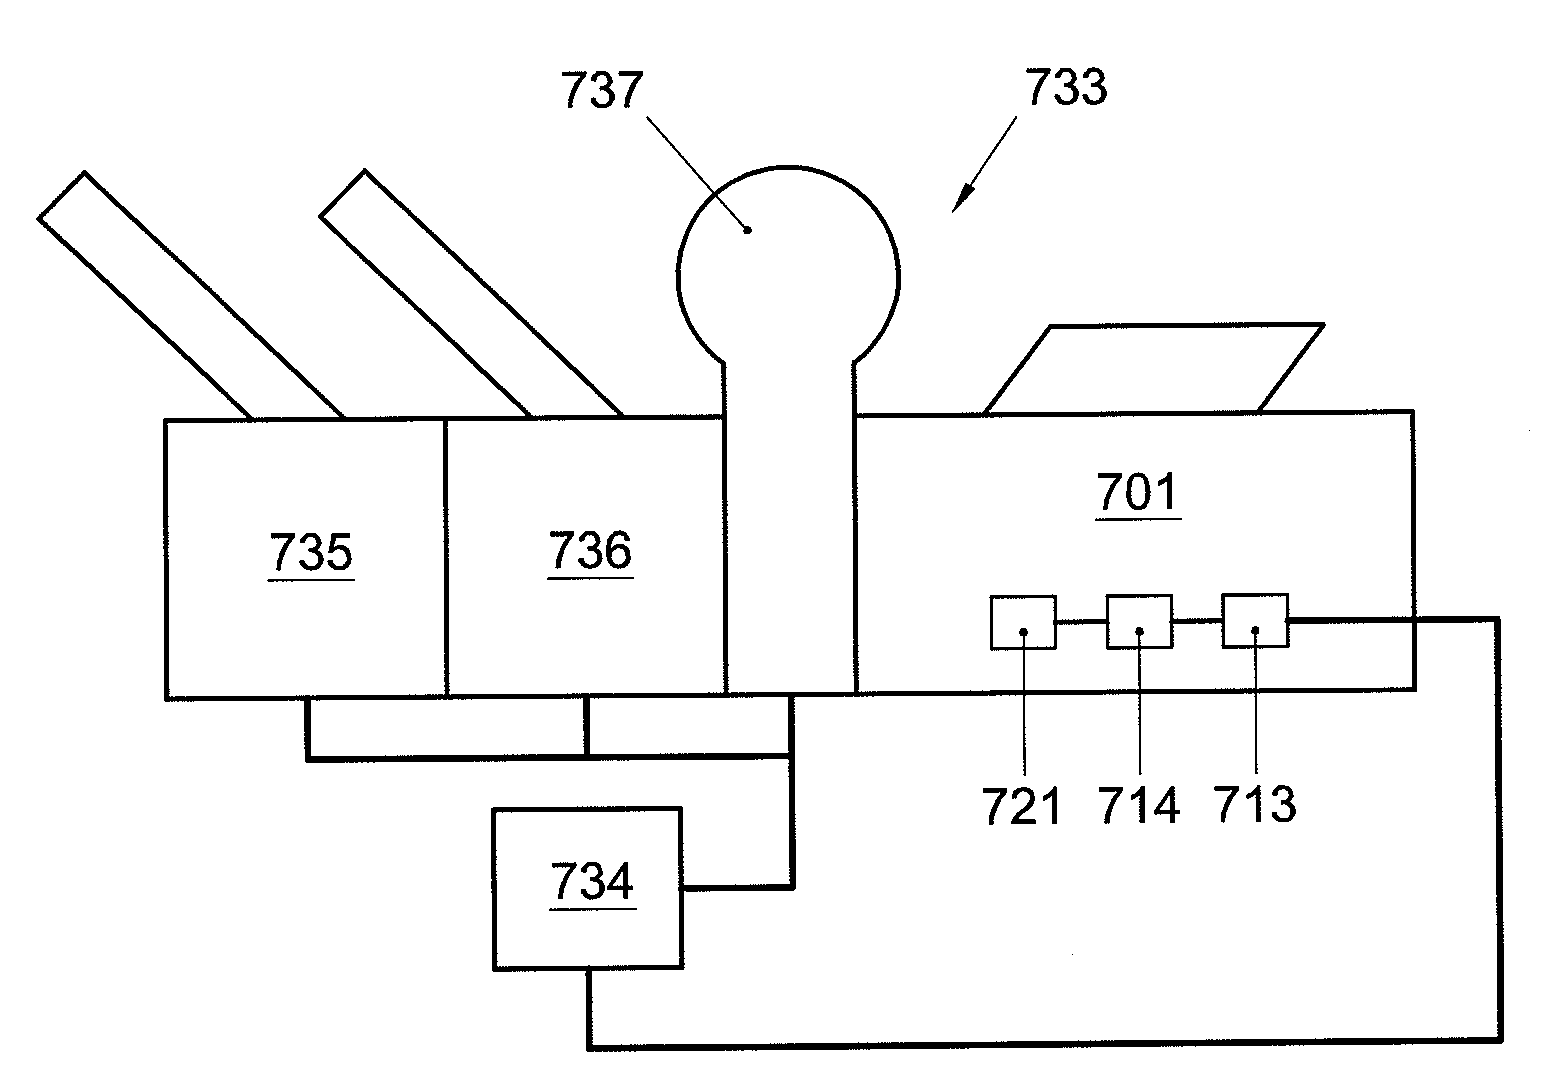 Apparatus and method for moistening envelope flaps